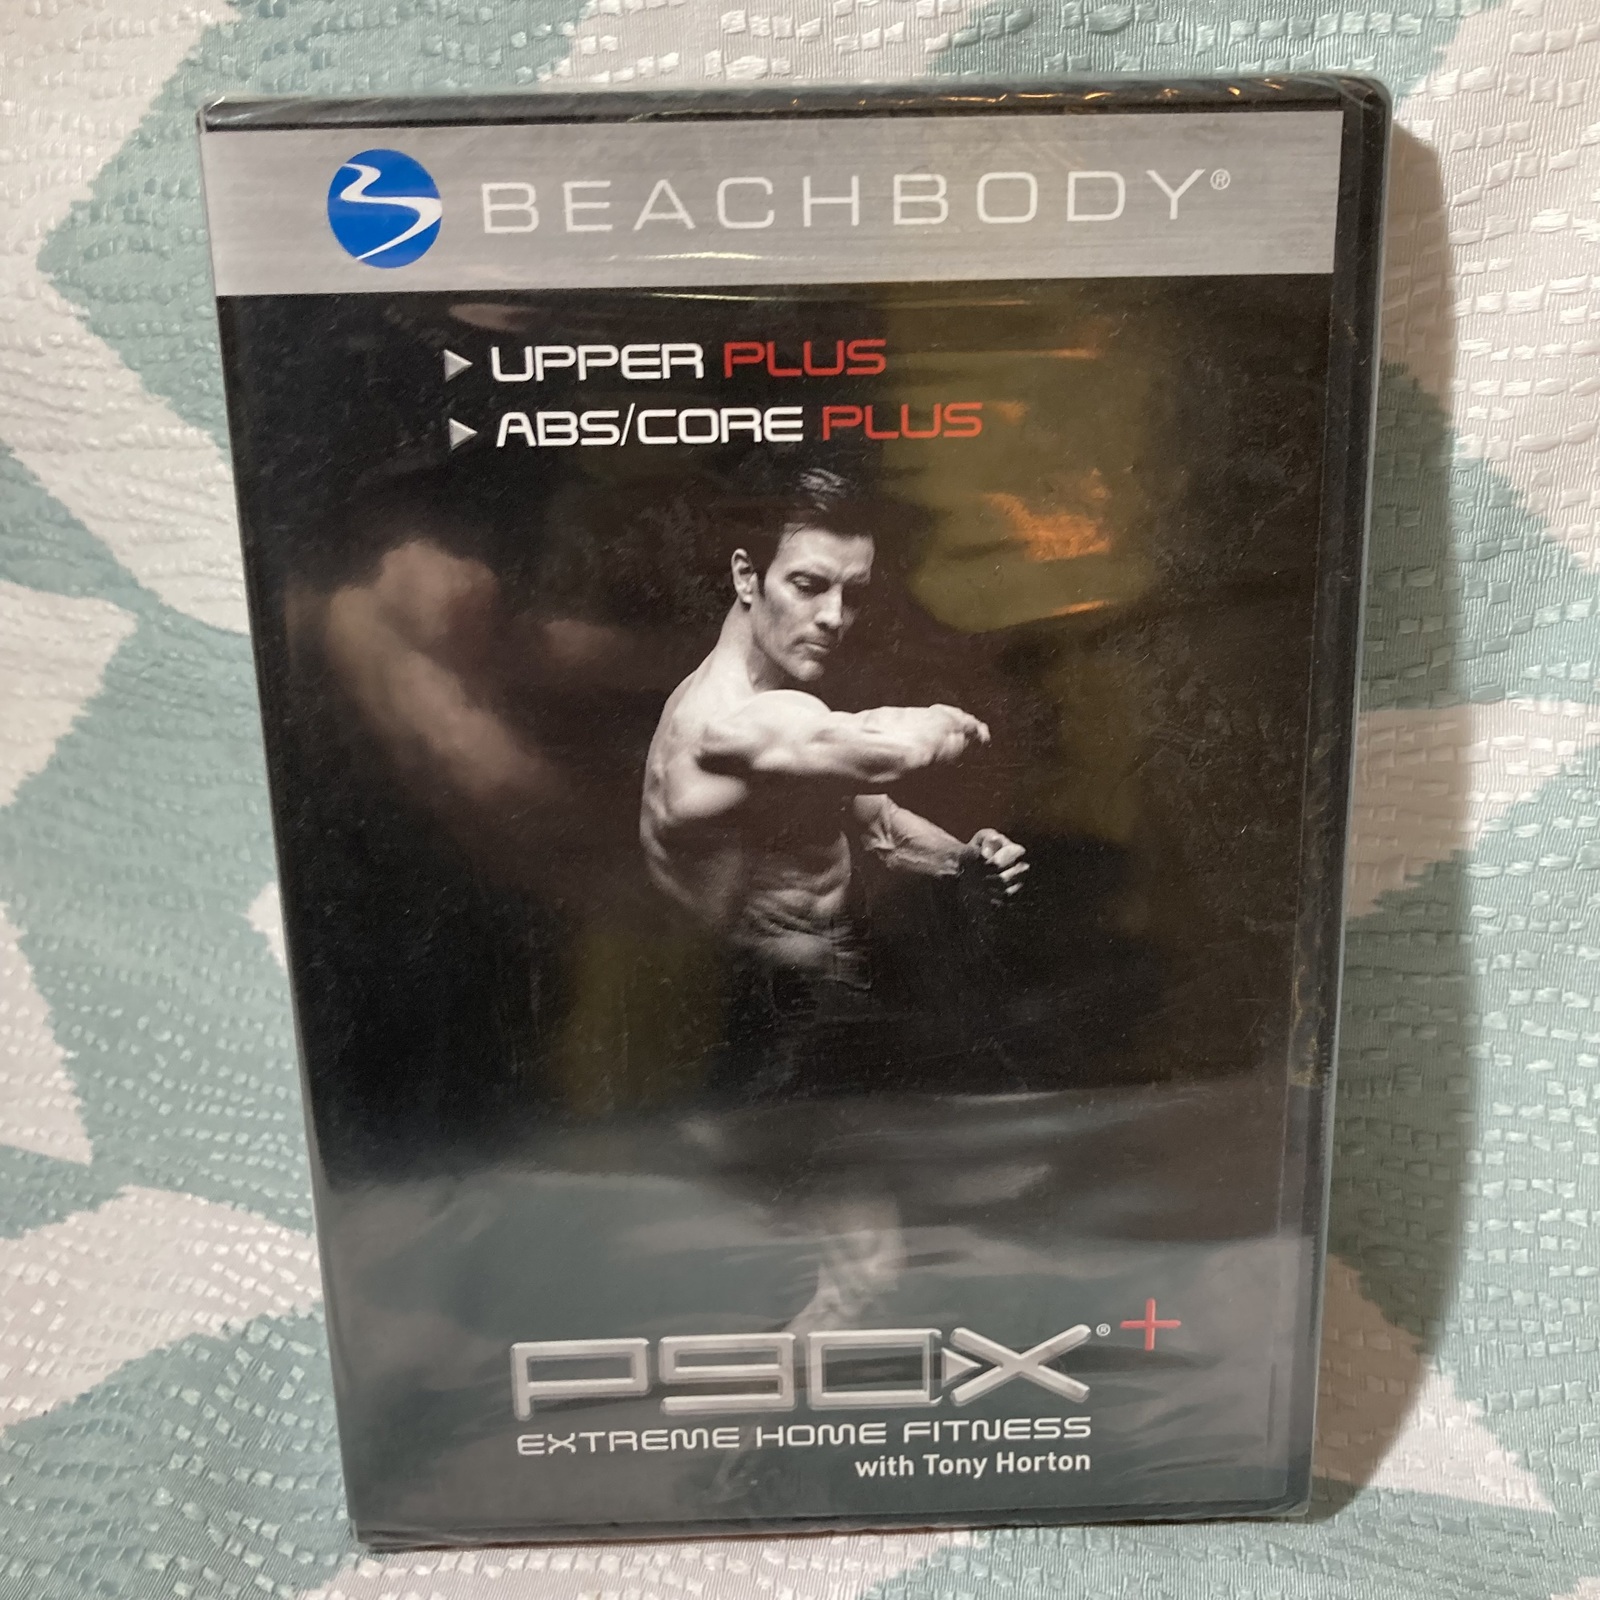 Primary image for Beachbody Upper Plus Abs/Core Plus DVD